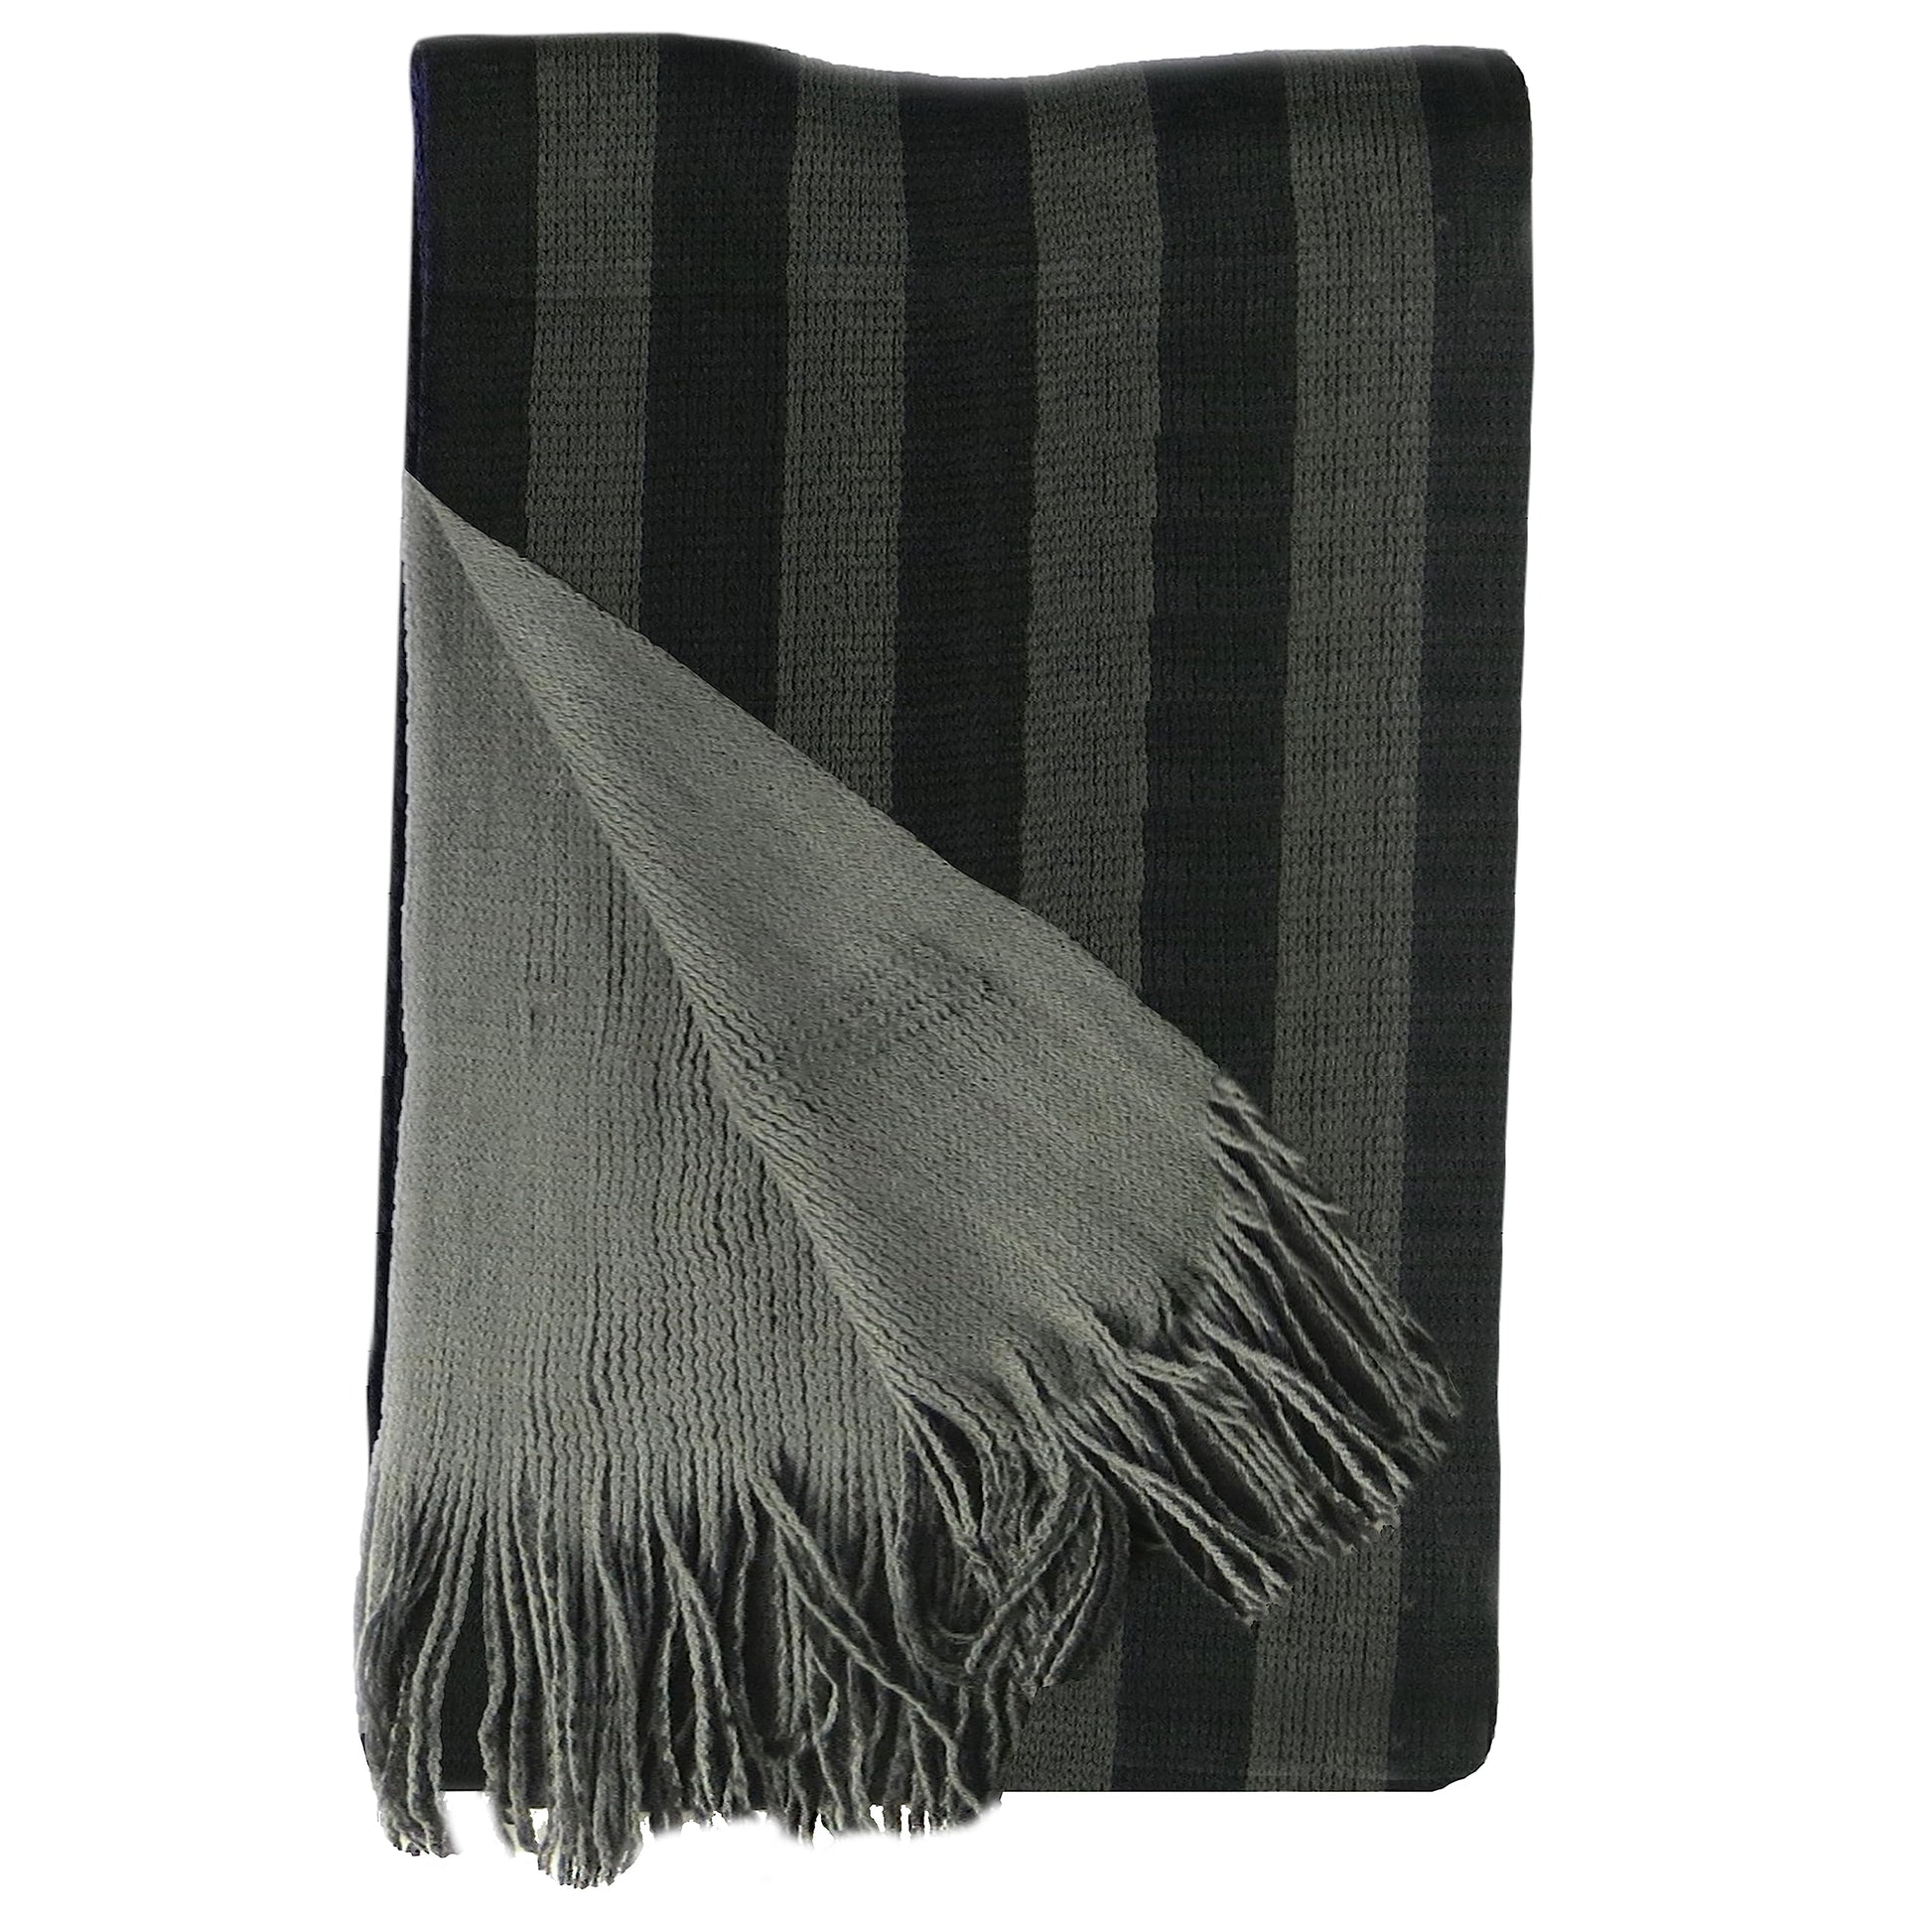 Men's Scarves In 3 Colours Reversible Stripe Design Soft Woven Scarf. Buy now for £7.00. A Scarves by Sock Stack. accessories, accessory, black, casual, comfortable, green, grey, Men, mens, One Size, outdoor, purple, Reversible, Scarf, Scarfs, Scarves, st